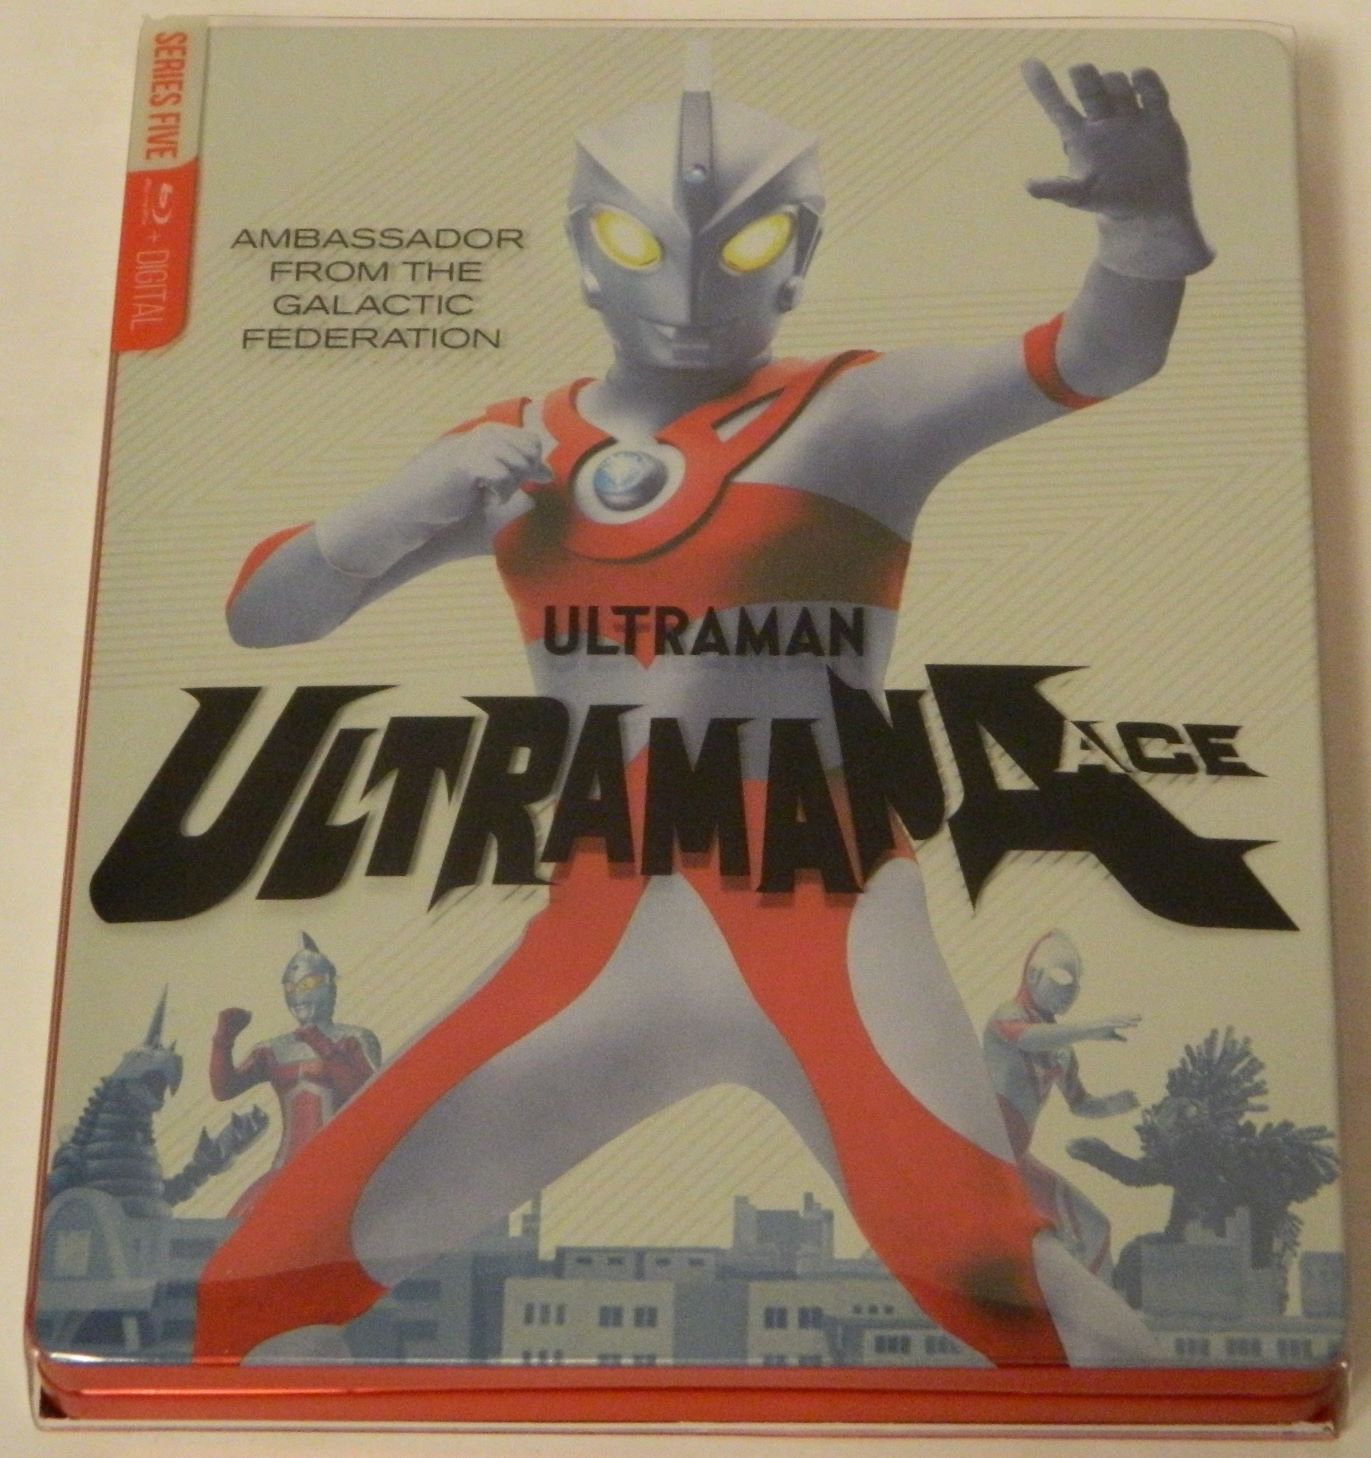 Ultraman Ace: The Complete Series – SteelBook Edition Blu-ray Review